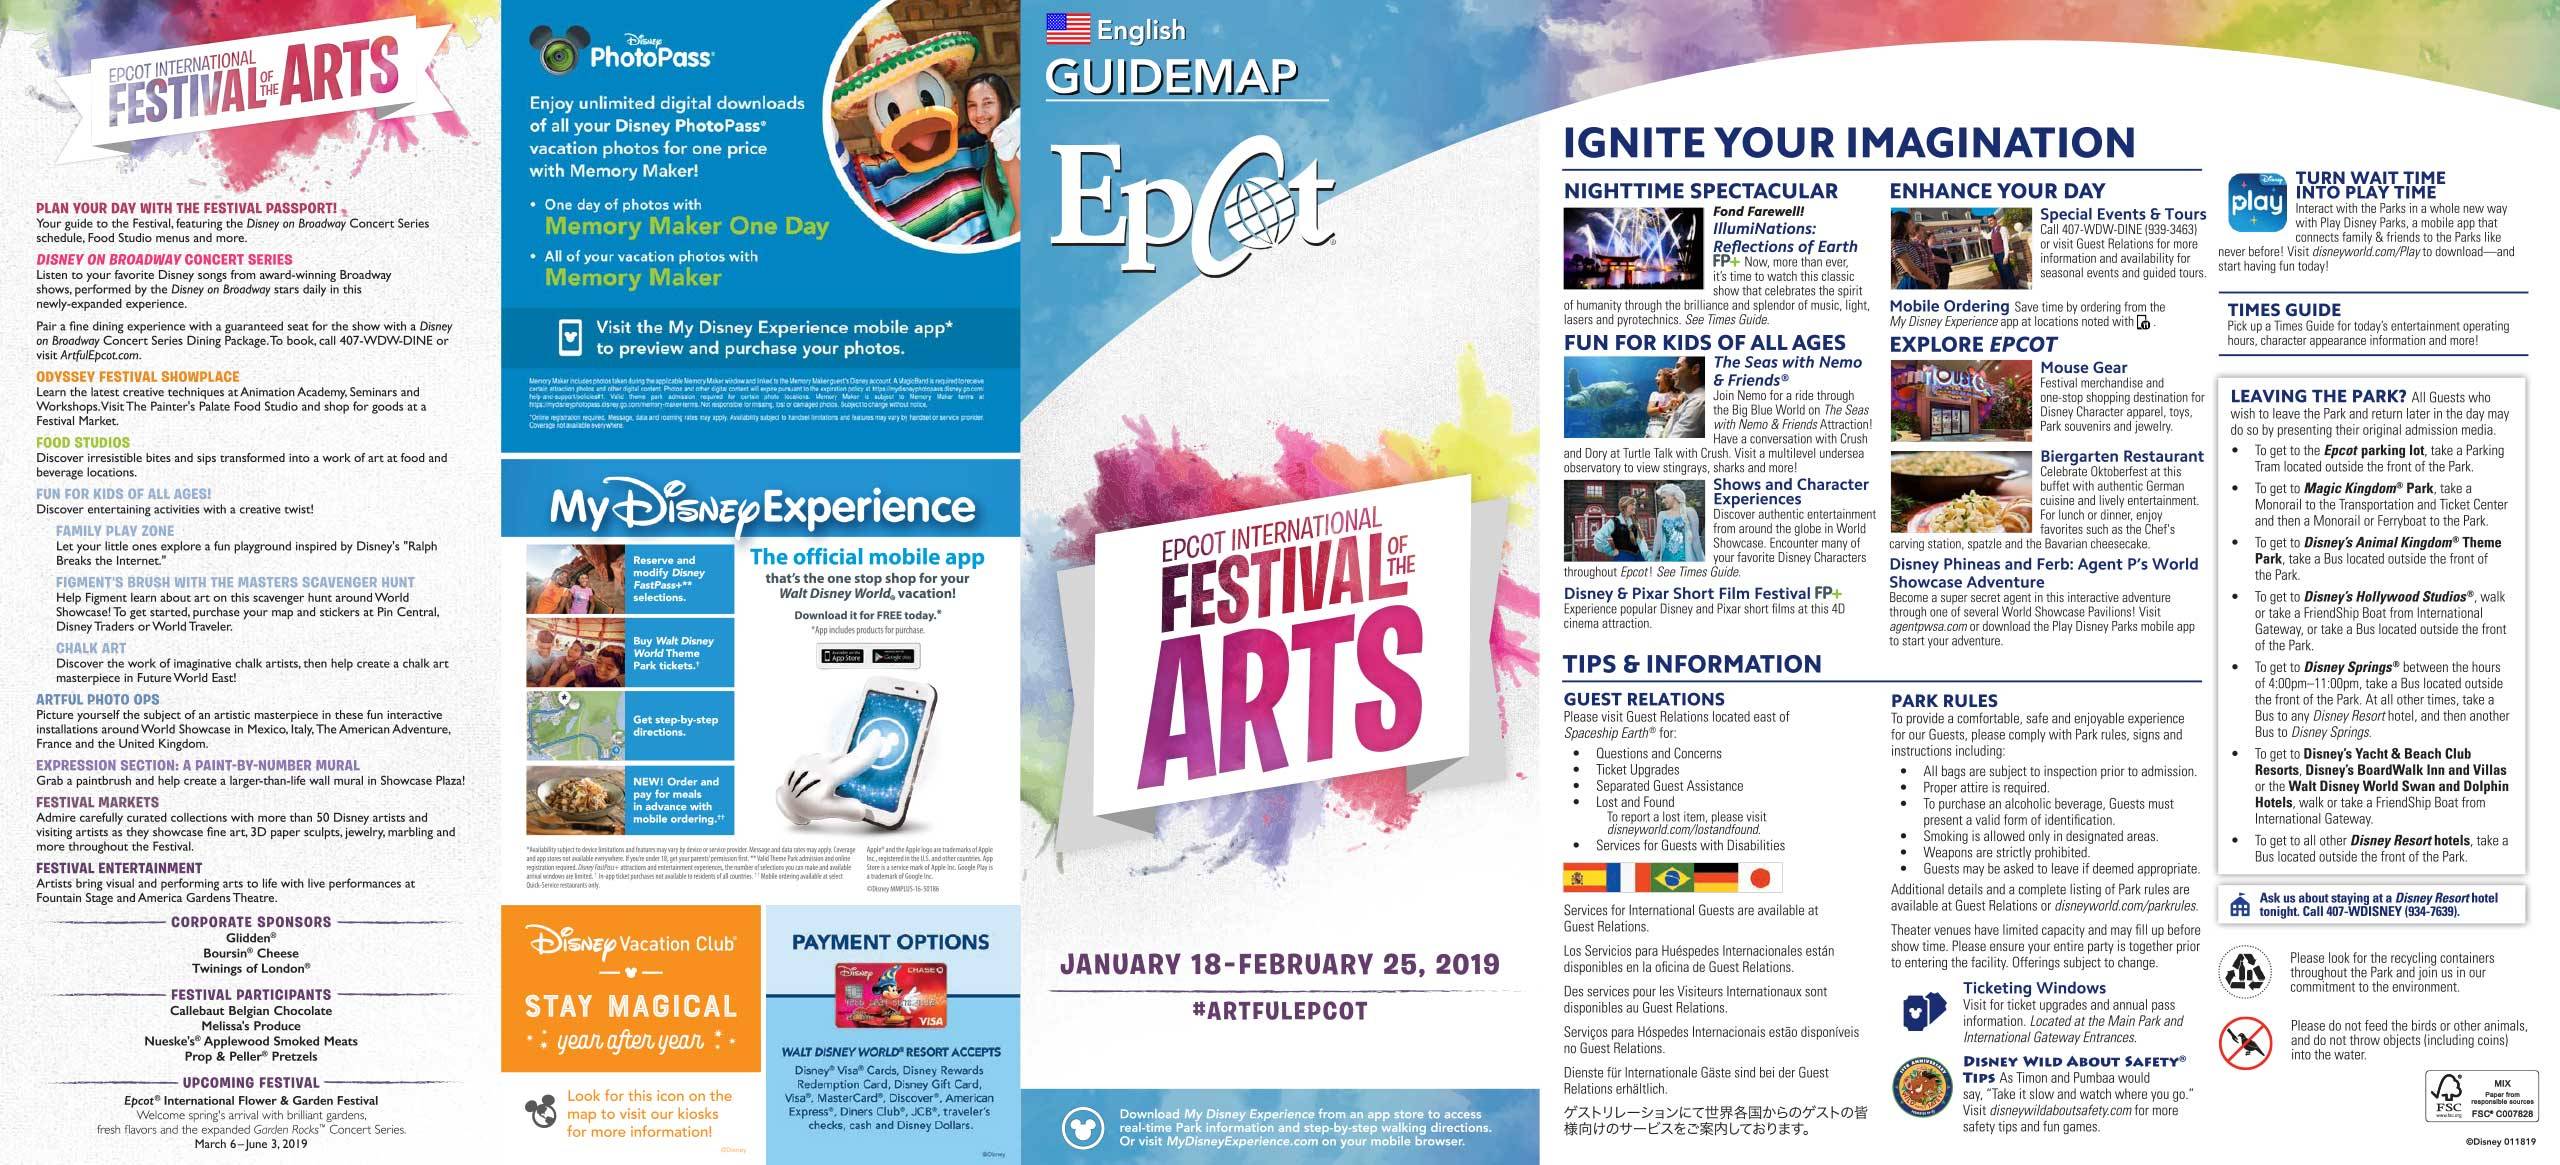 Epcot Guide Map January 2019 - Front